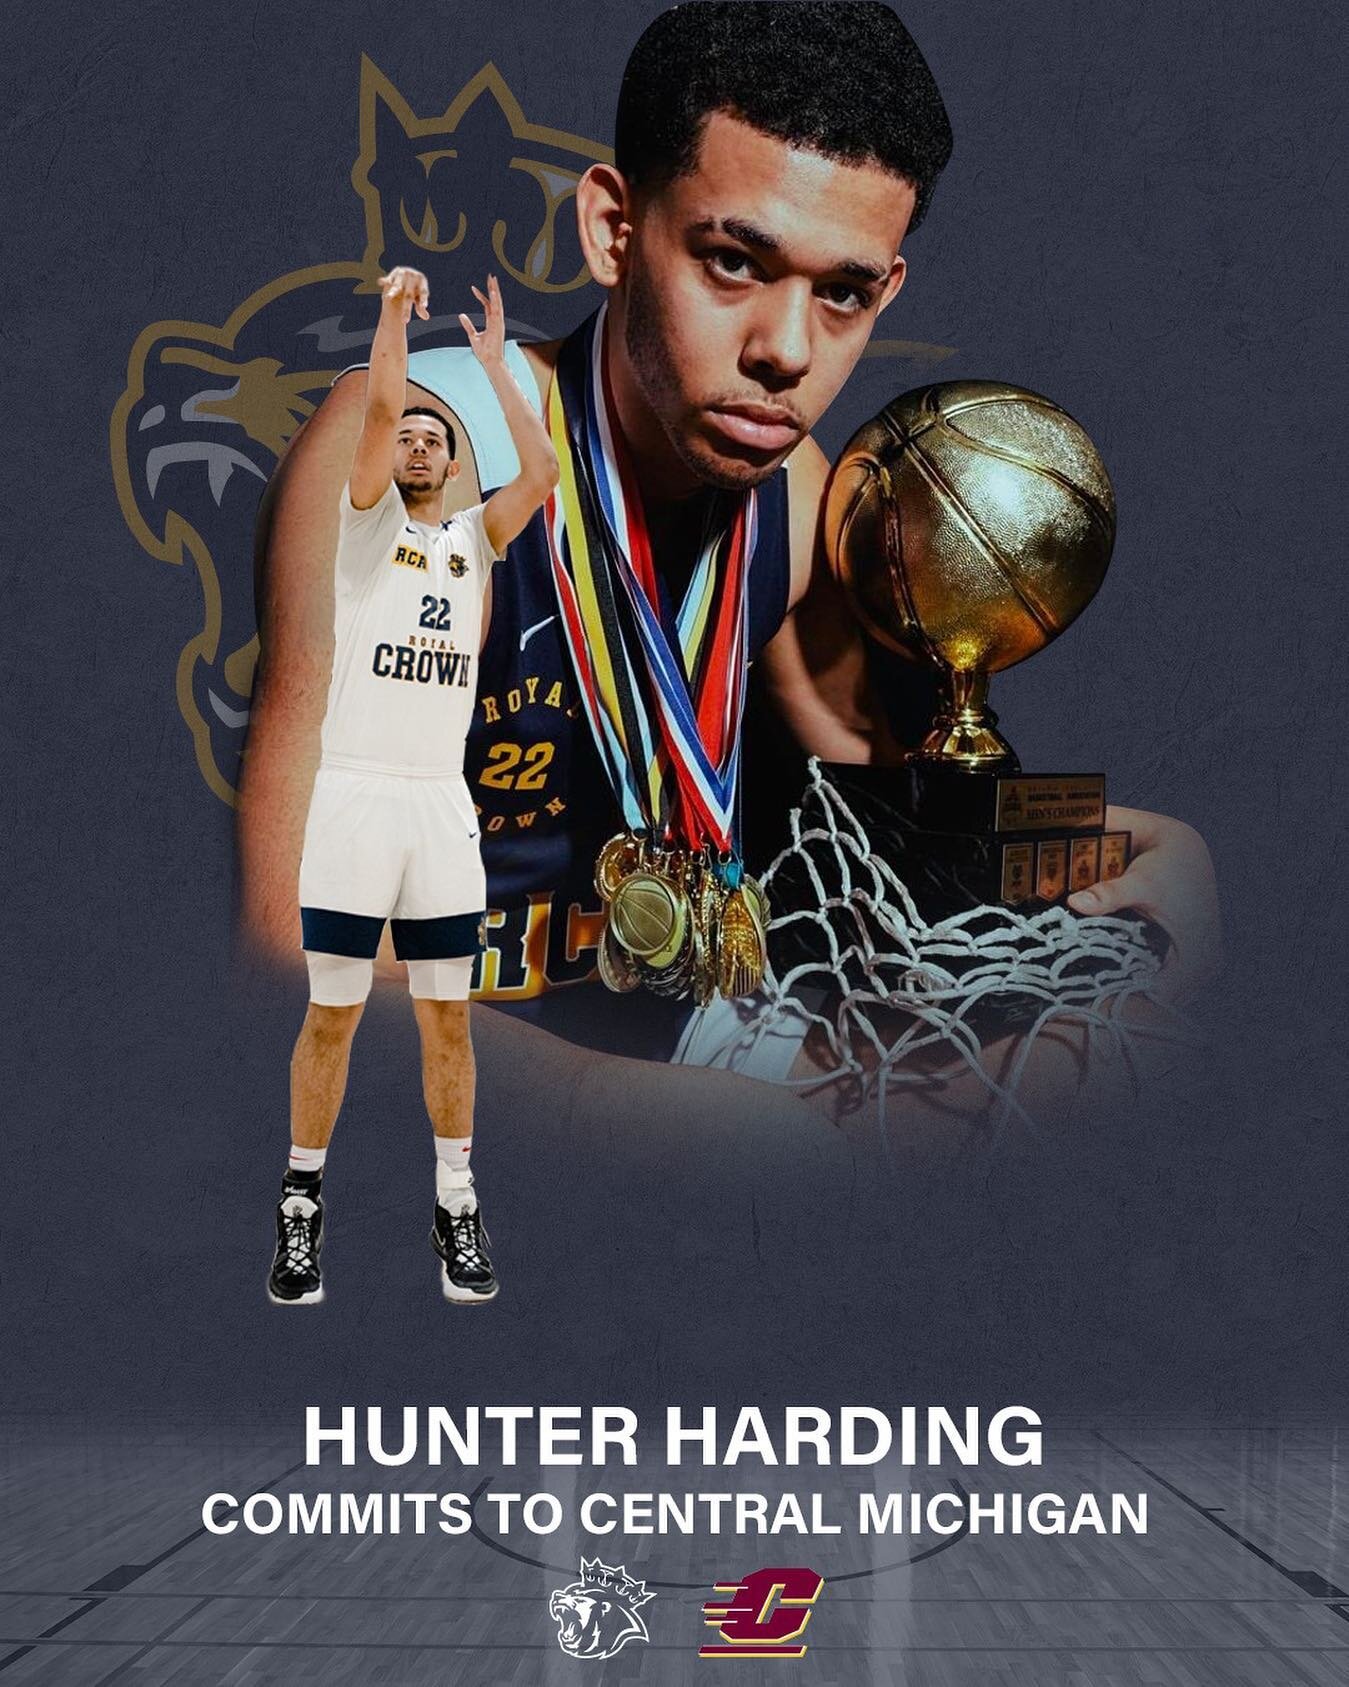 Proud to announce @iamhunterharding has committed to @cmumensbball 

#defendthecrown